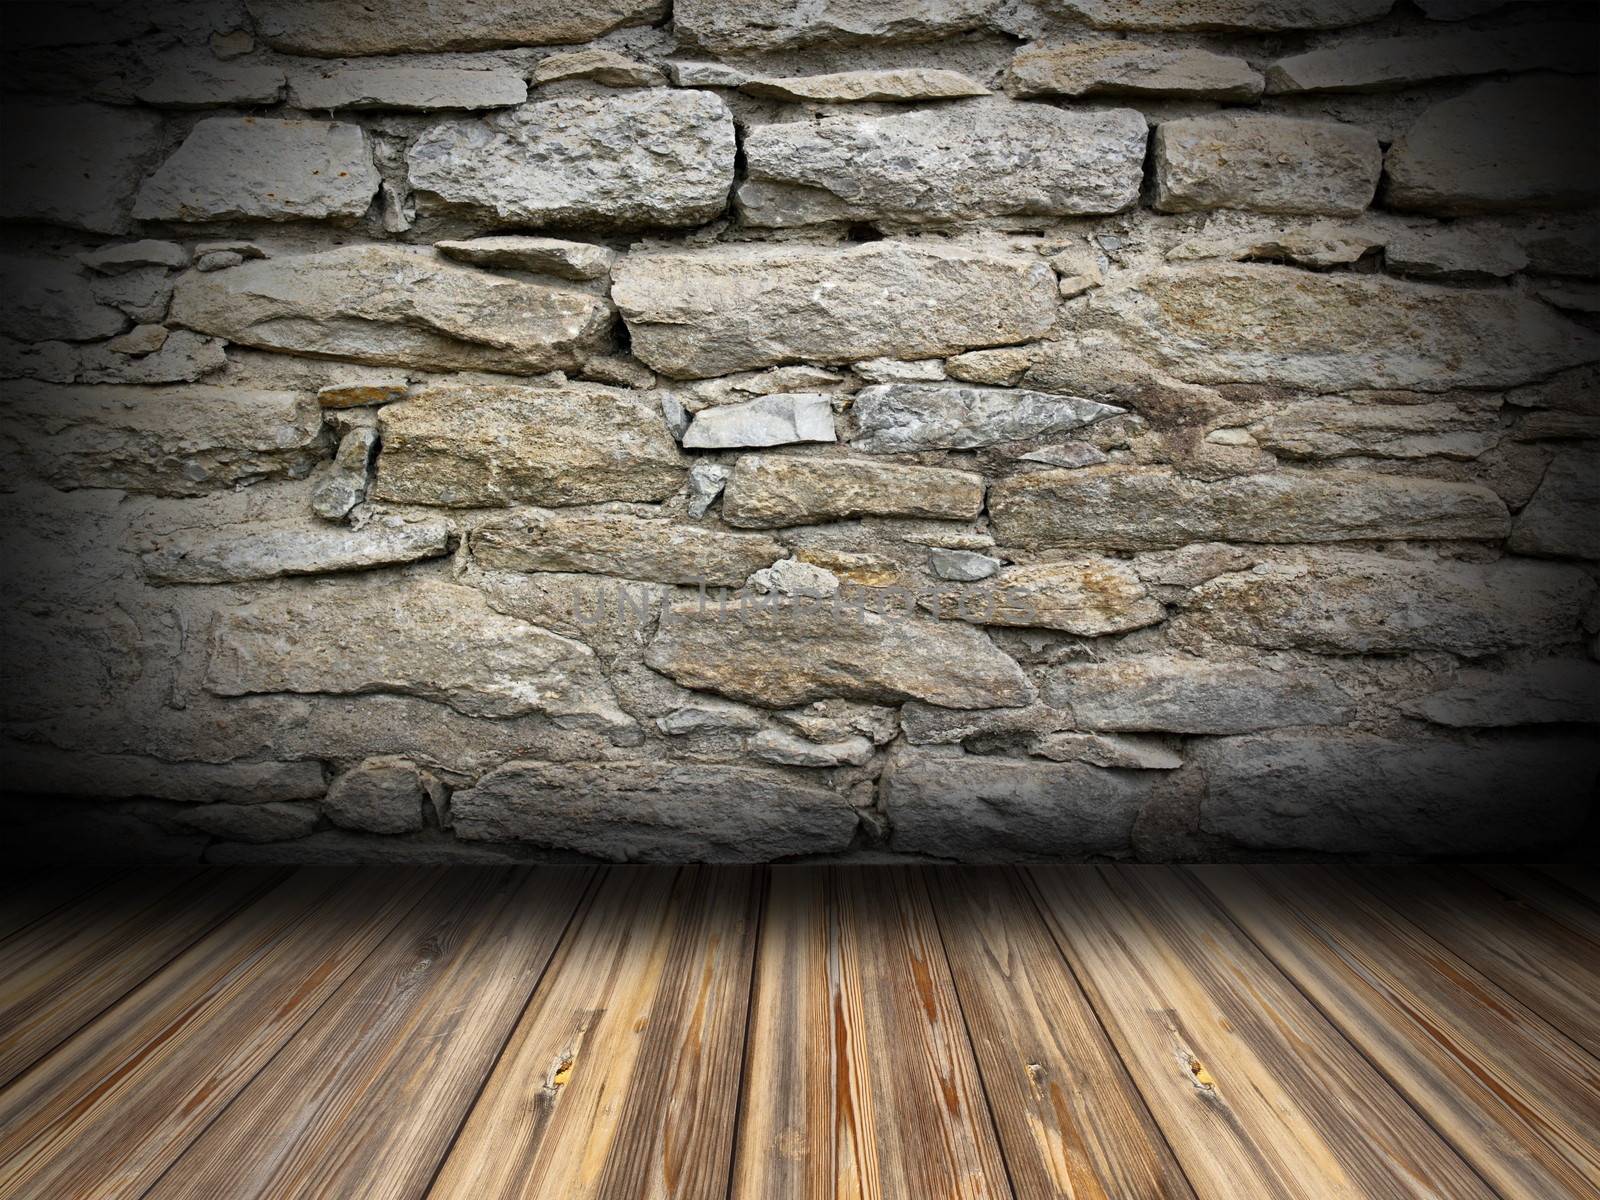 empty room interior background with wooden floor and grungy stone wall